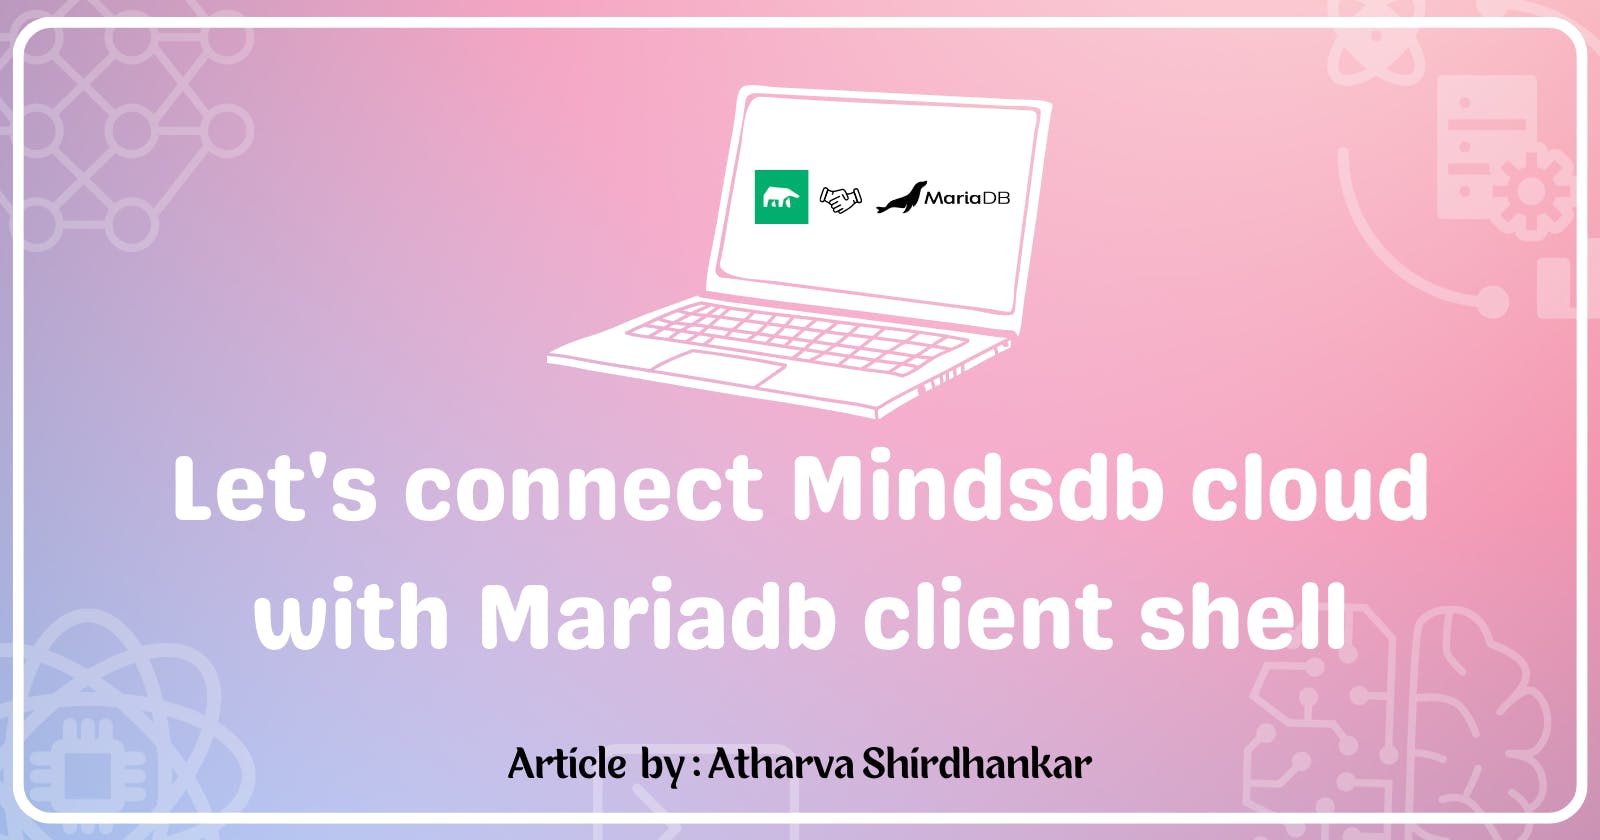 Let's connect Mindsdb with Mariadb shell Locally and Predict the Mobile Price Range